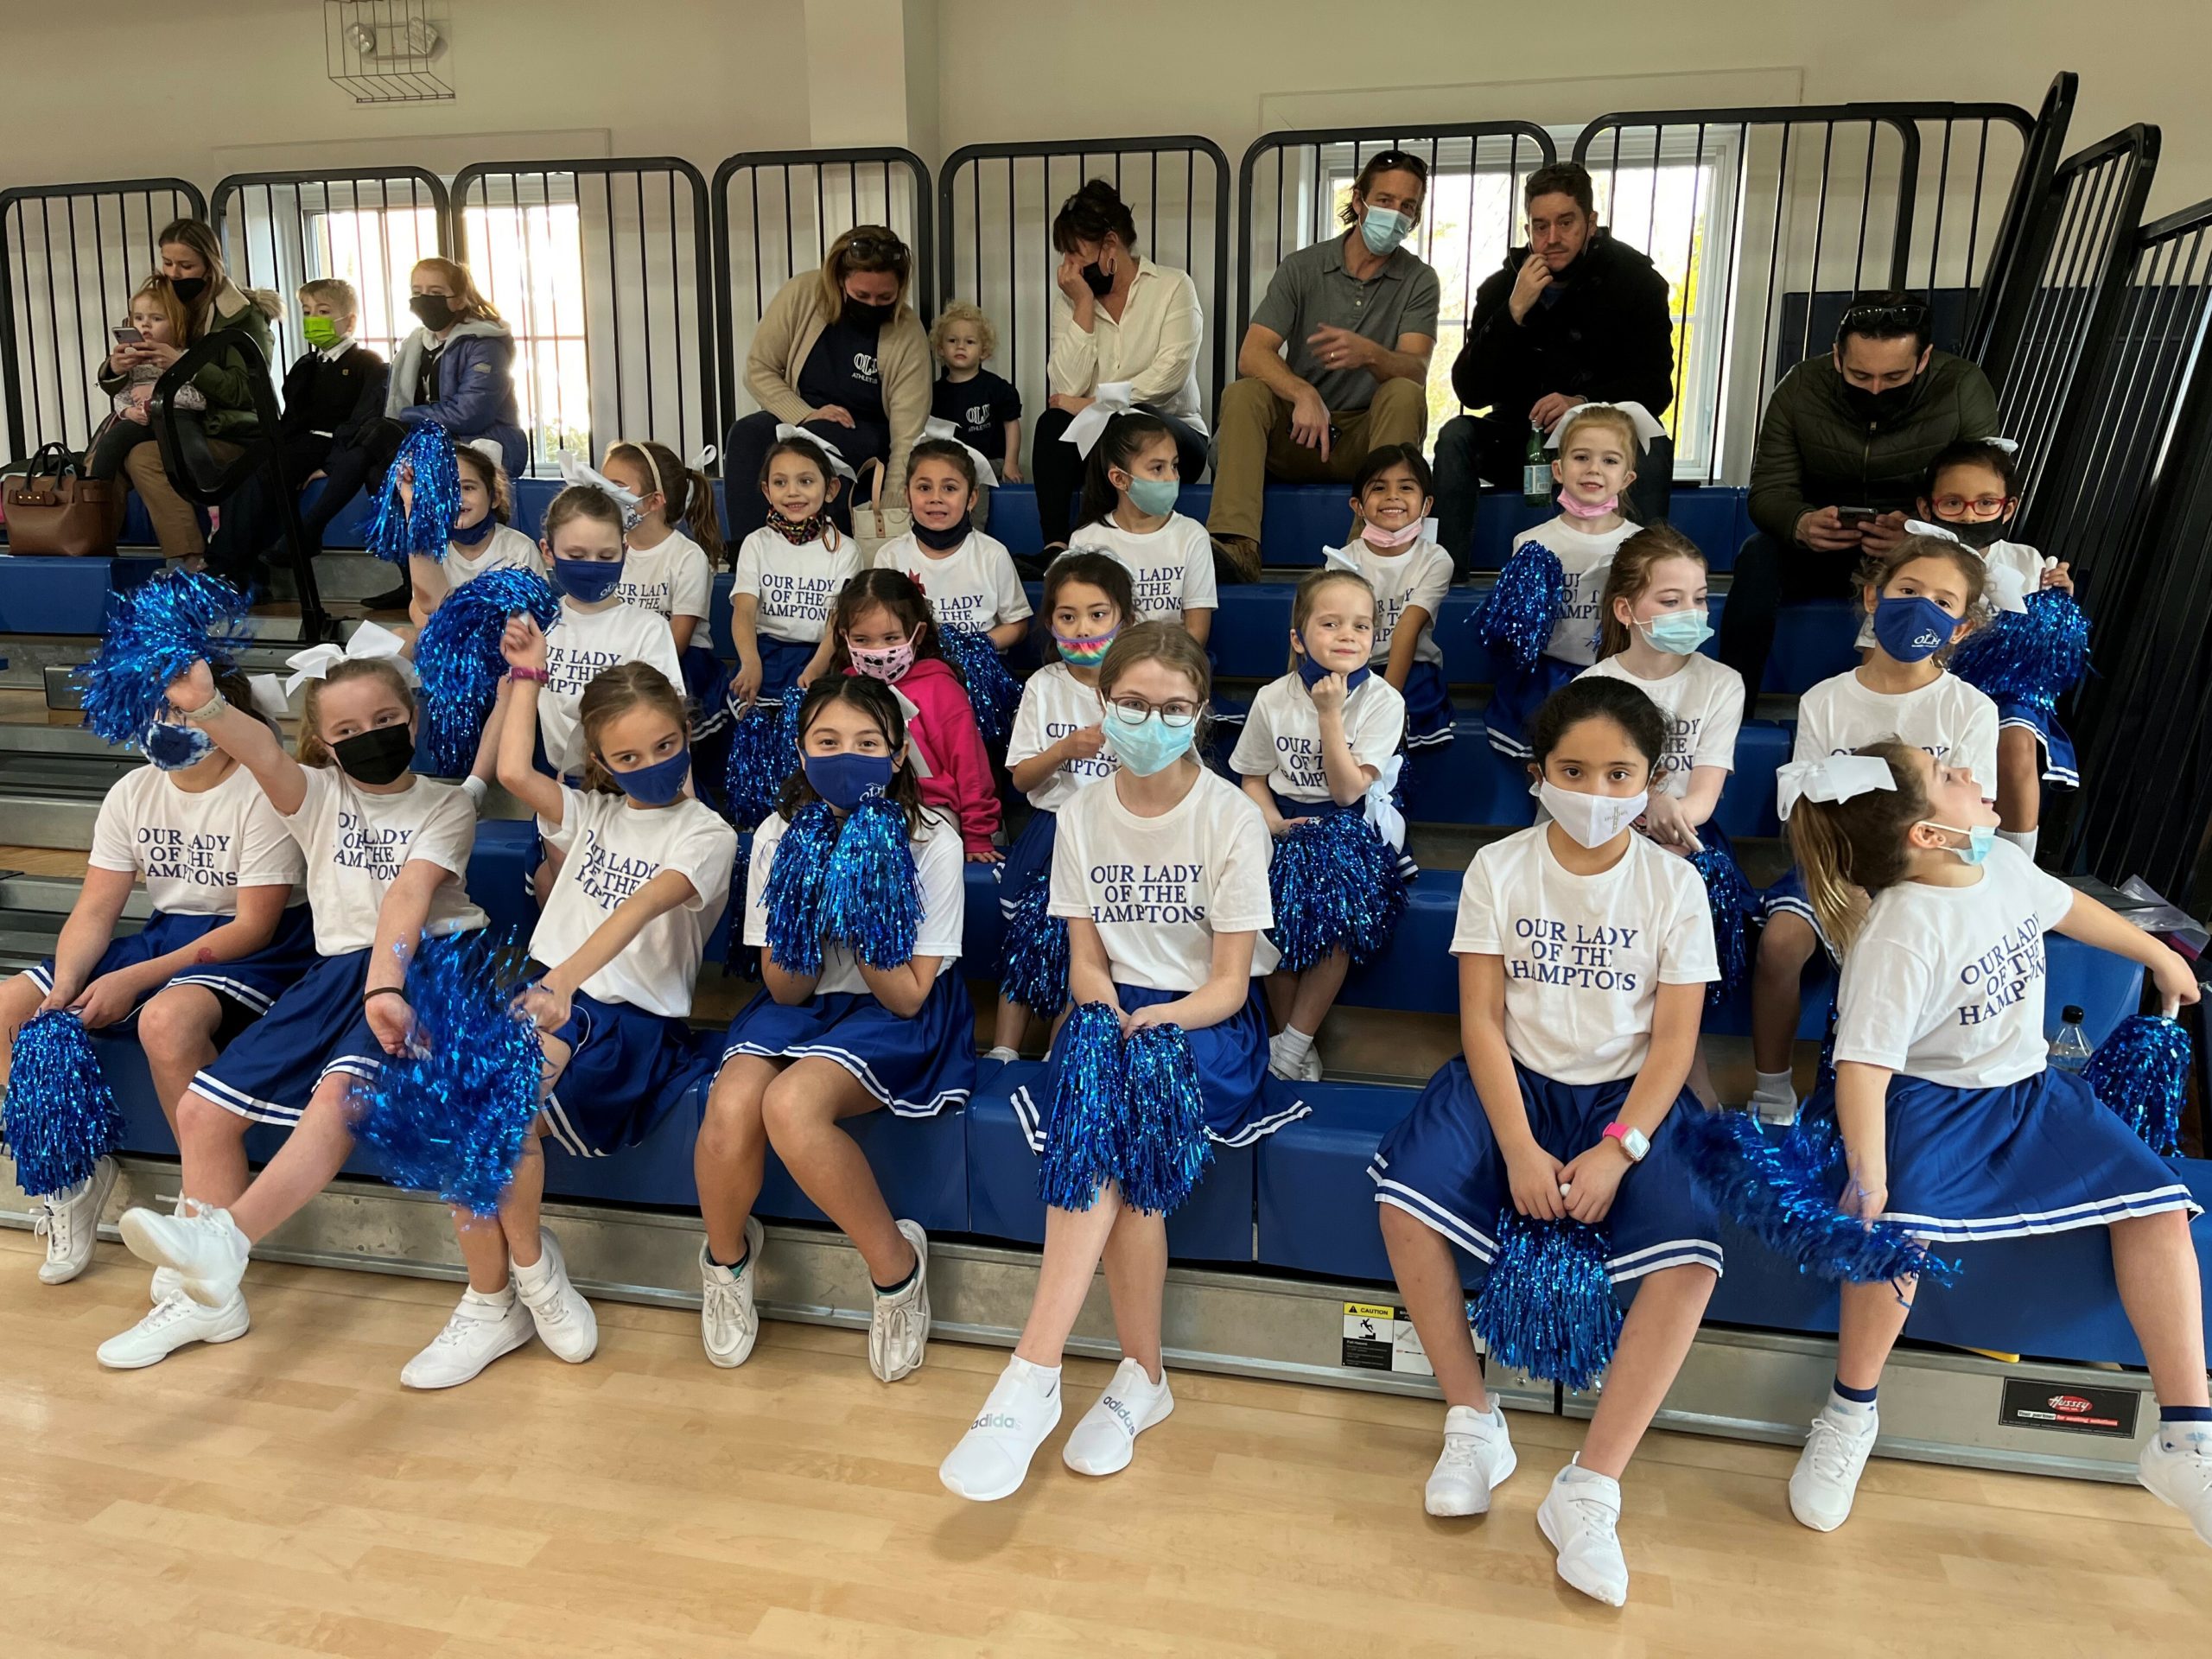 The Our Lady of the Hamptons School primary cheerleaders made their debut at a recent basketball game.